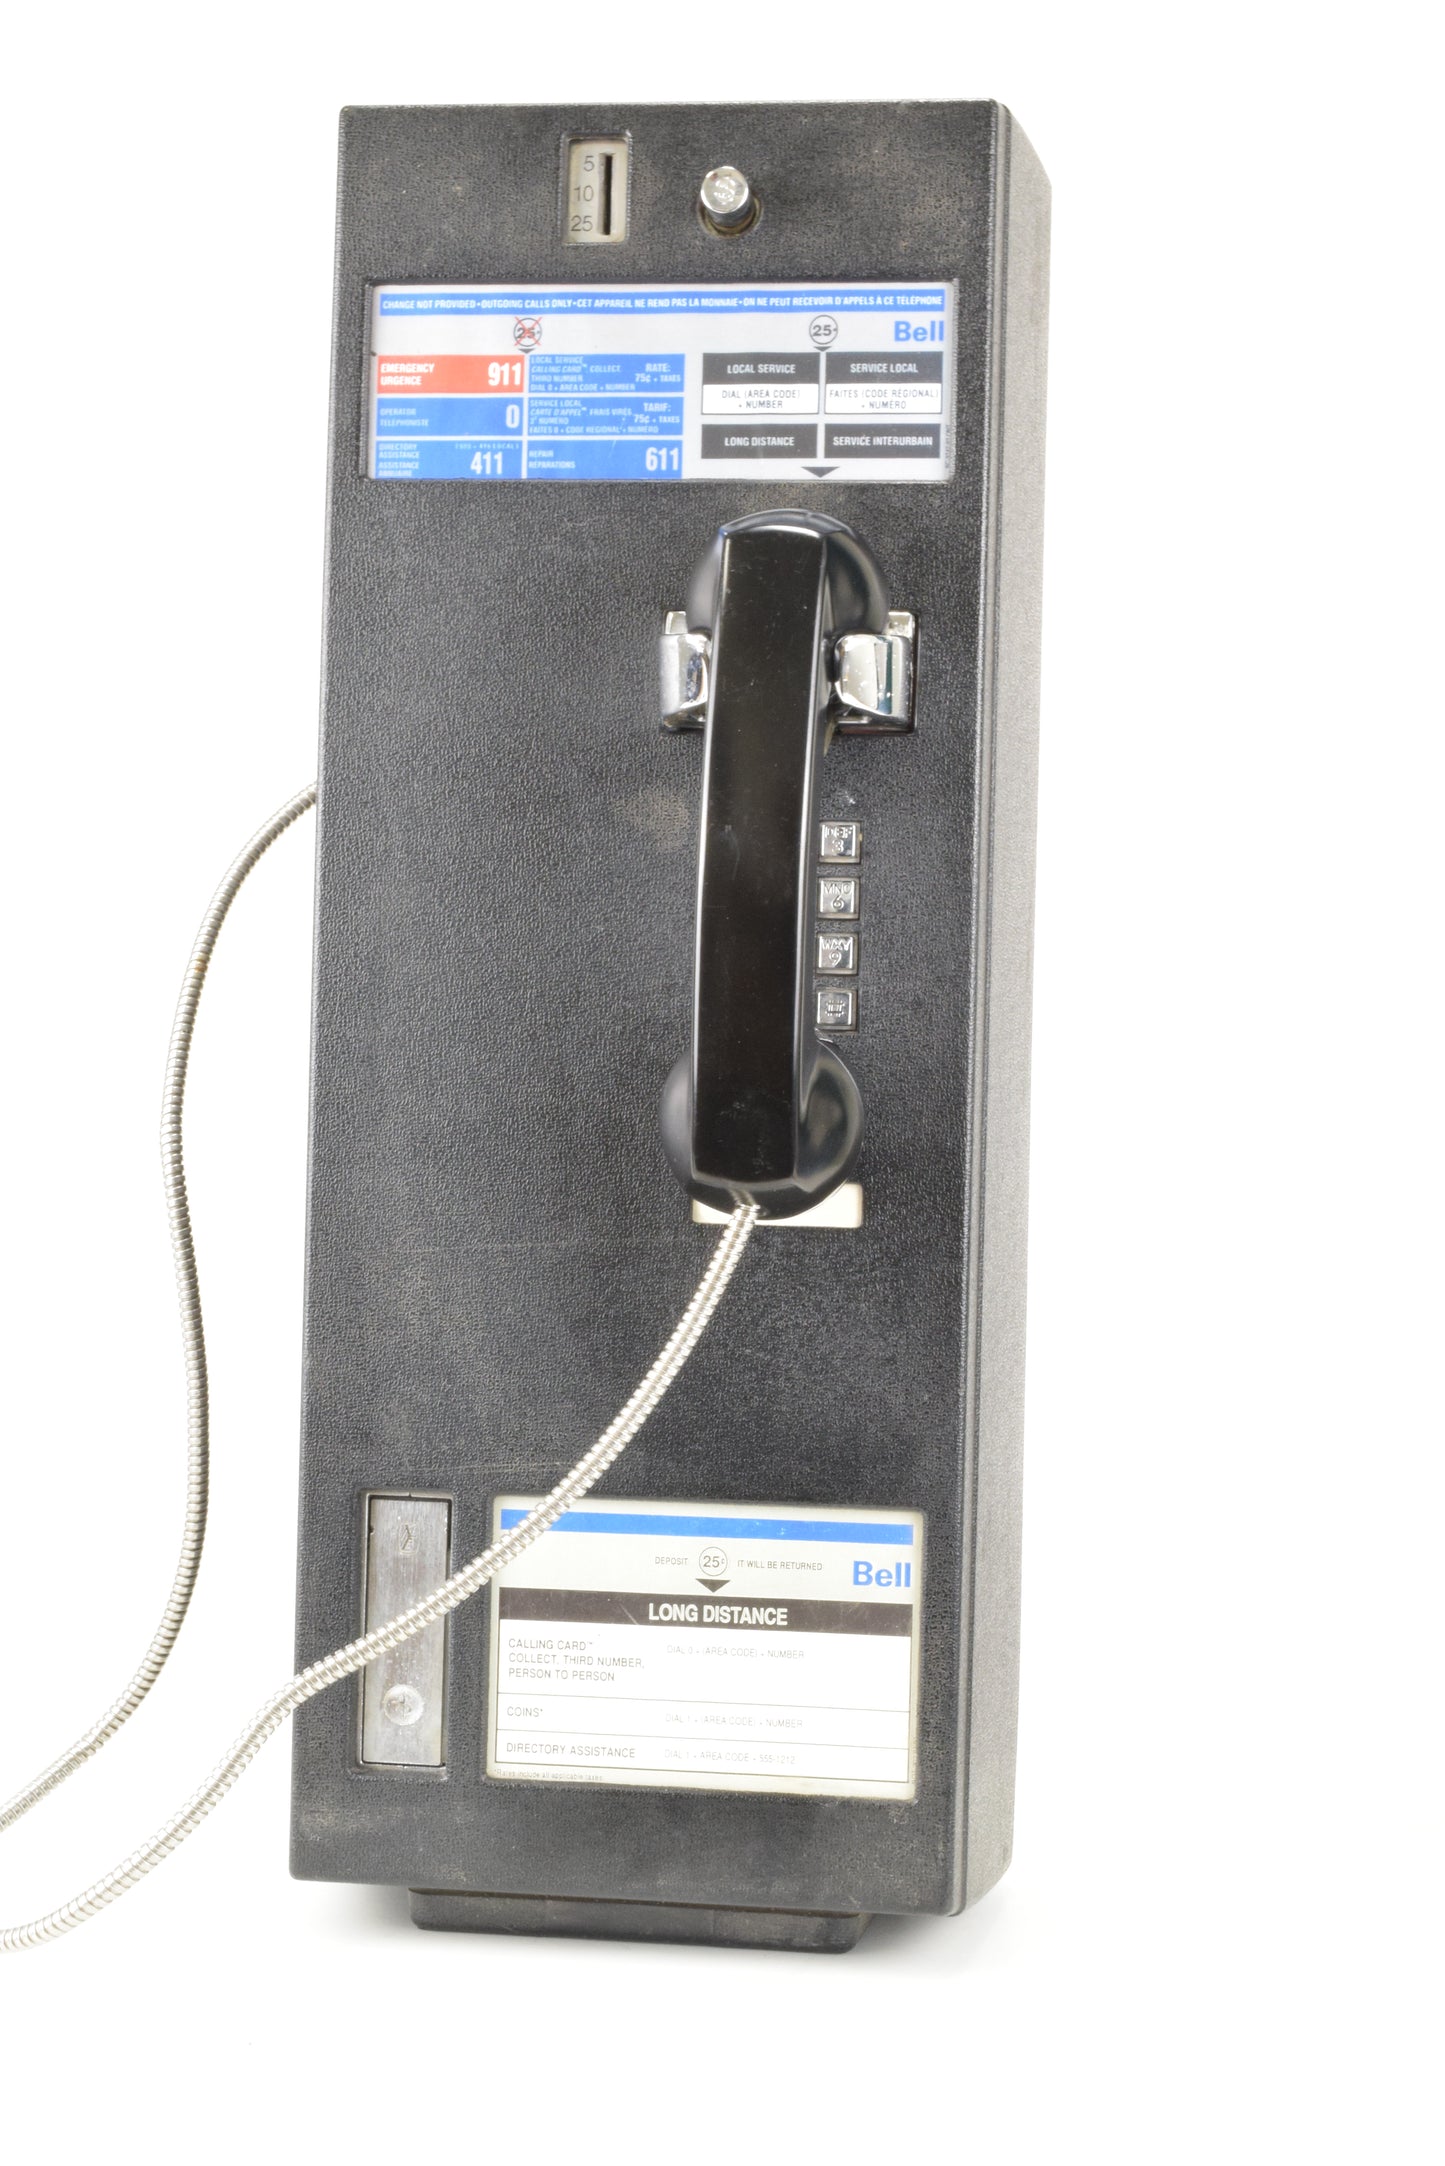 Northern Electric Centurion Payphone - Brown